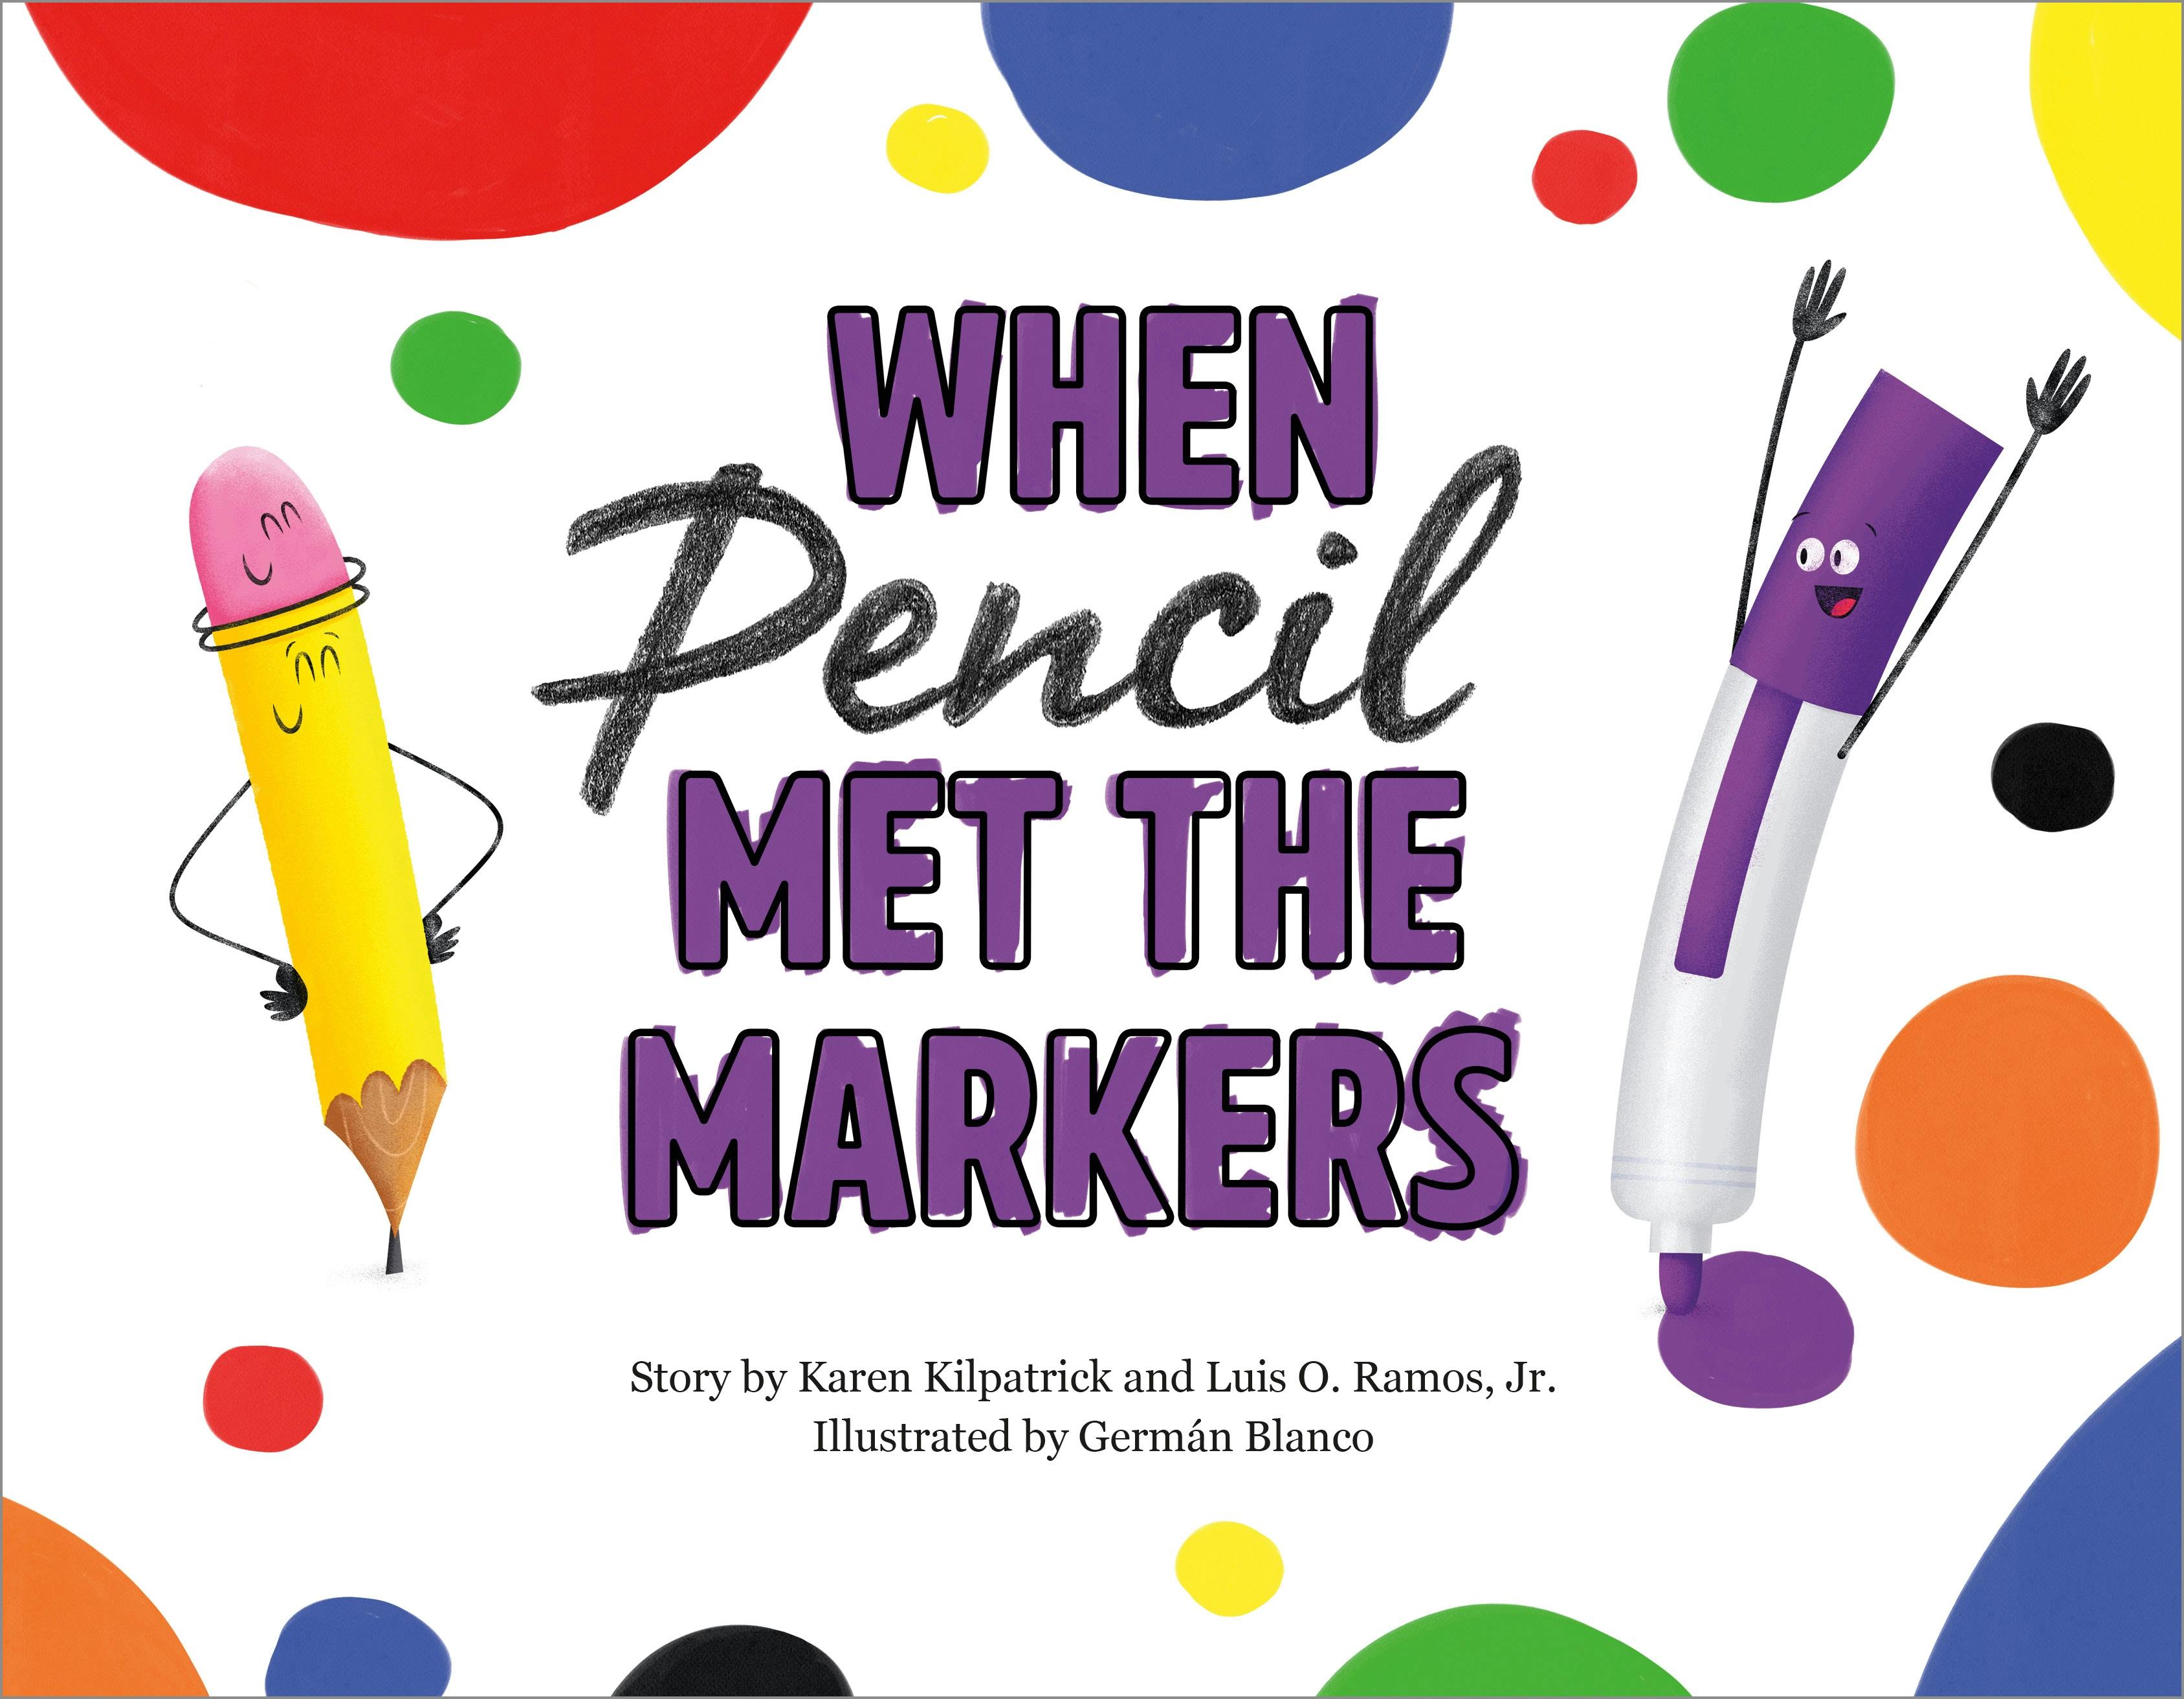 My First Book of Dot Marker Coloring - (Woo! Jr. Kids Activities Books) by  Woo! Jr Kids Activities (Paperback)